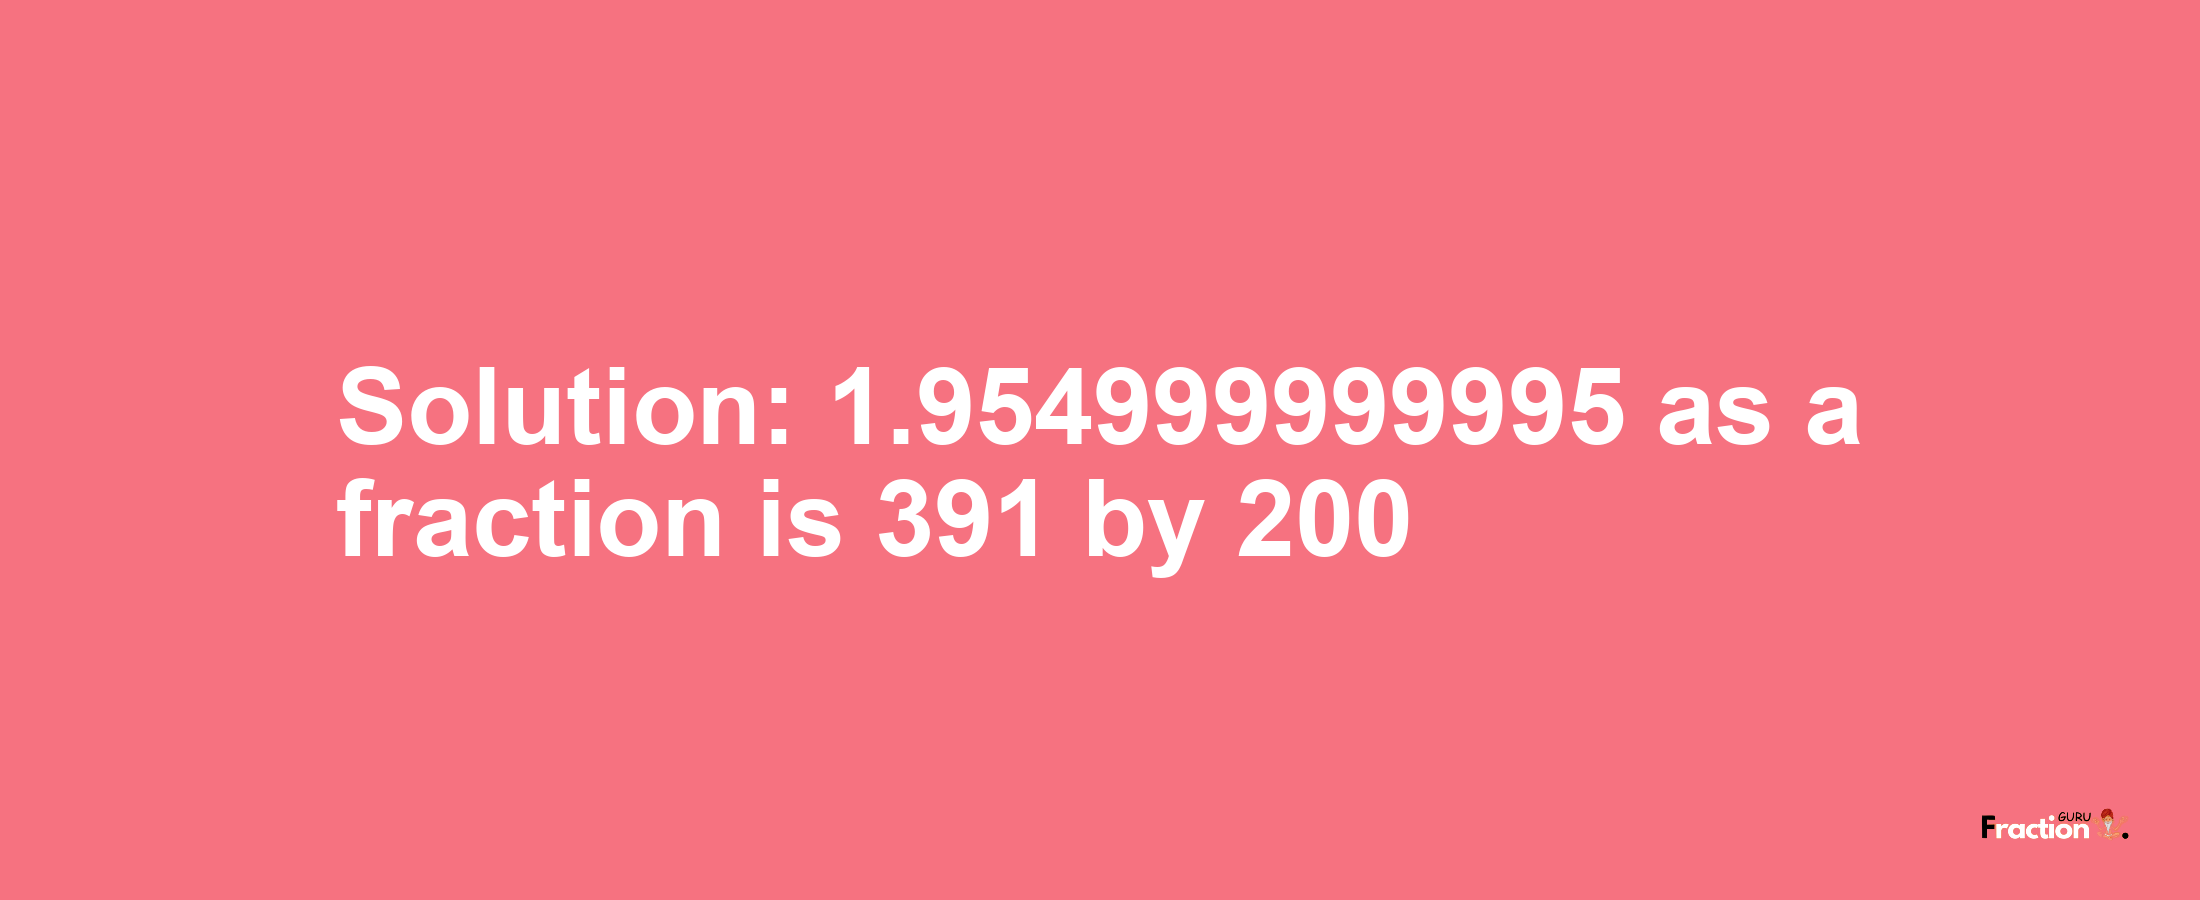 Solution:1.954999999995 as a fraction is 391/200